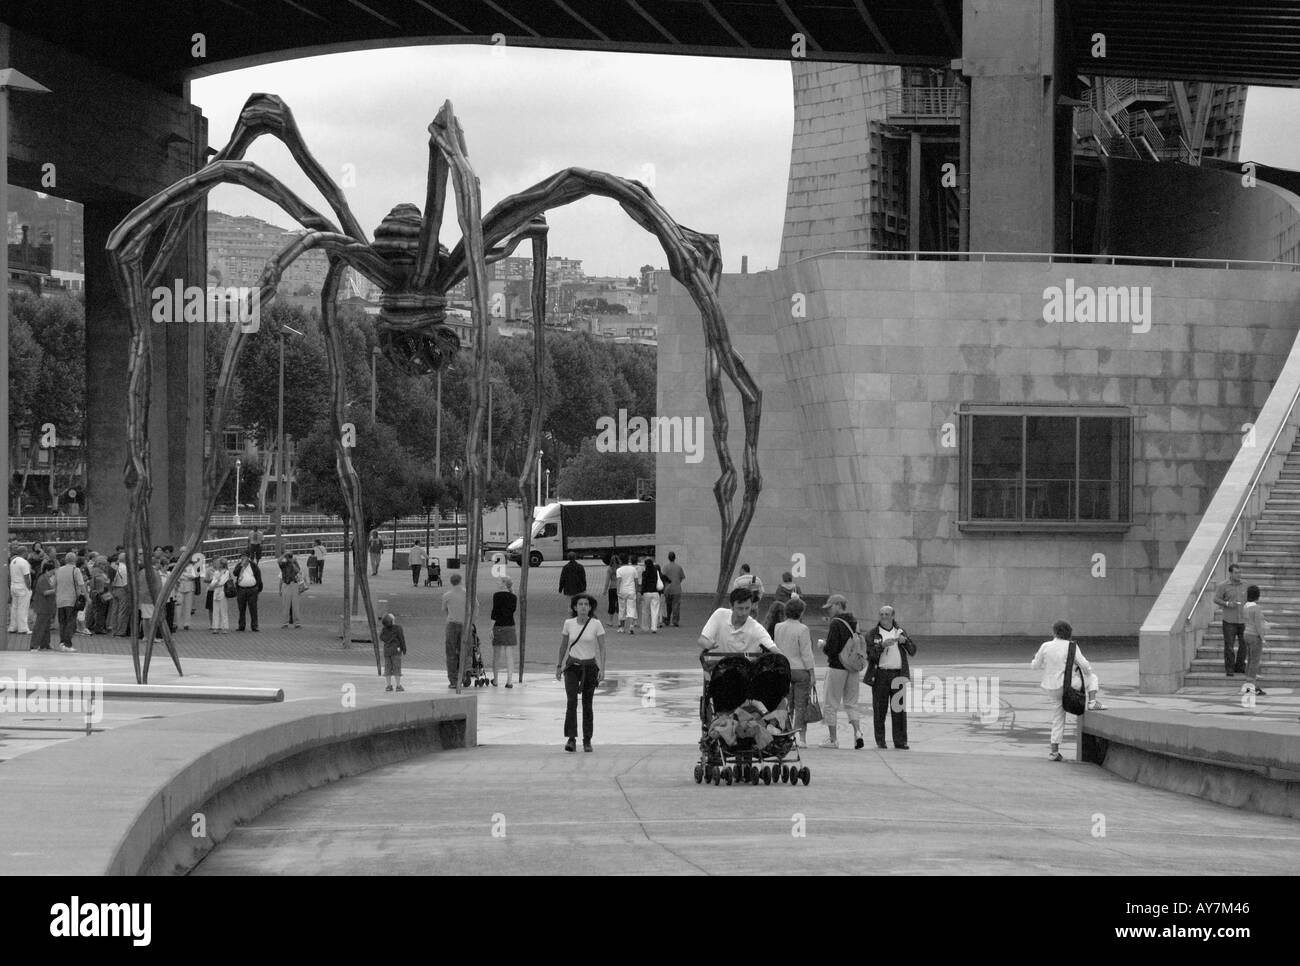 Characteristic View of Bourgeois' Huge Spider Maman outside Guggenheim Museum Bilbao Bilbo Basque Country Spain Europe Stock Photo